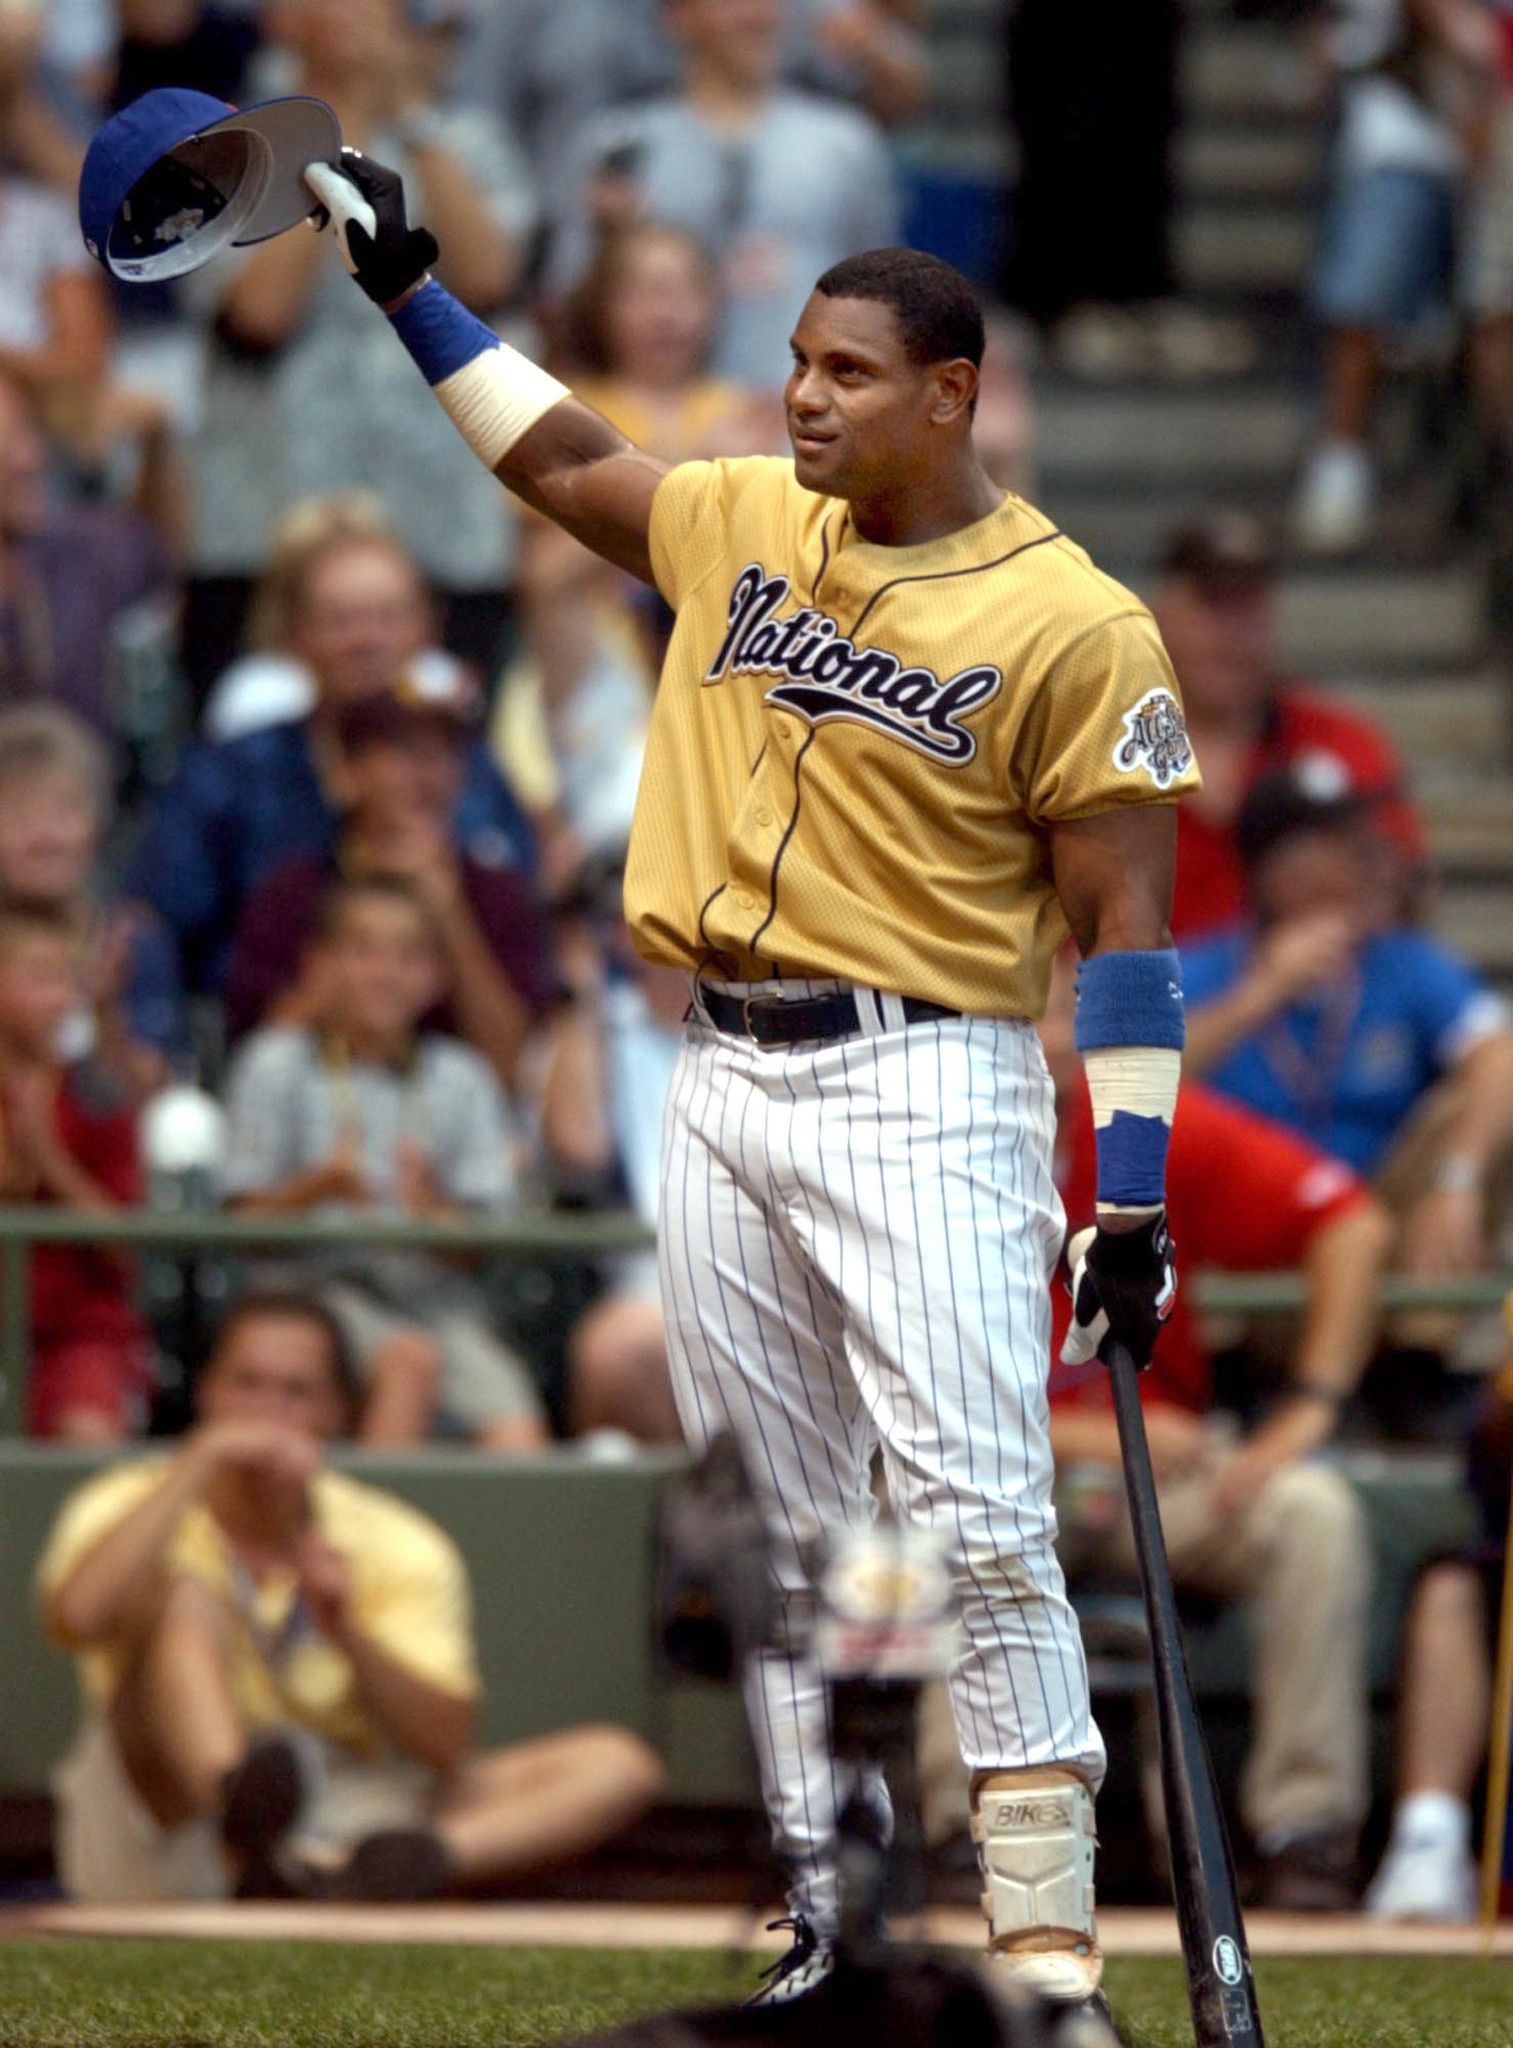 Sammy Sosa's career with the Chicago Cubs